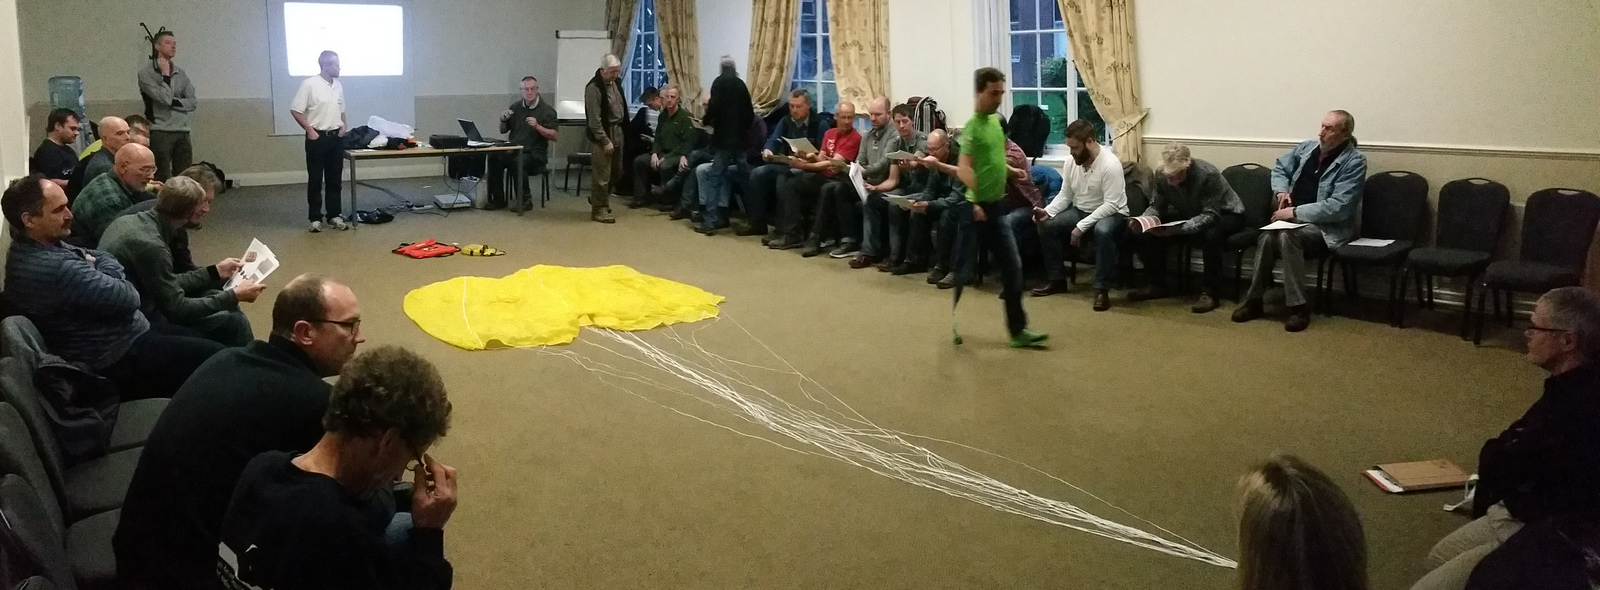 BHPA Emergency Parachute Conference 2015 demo